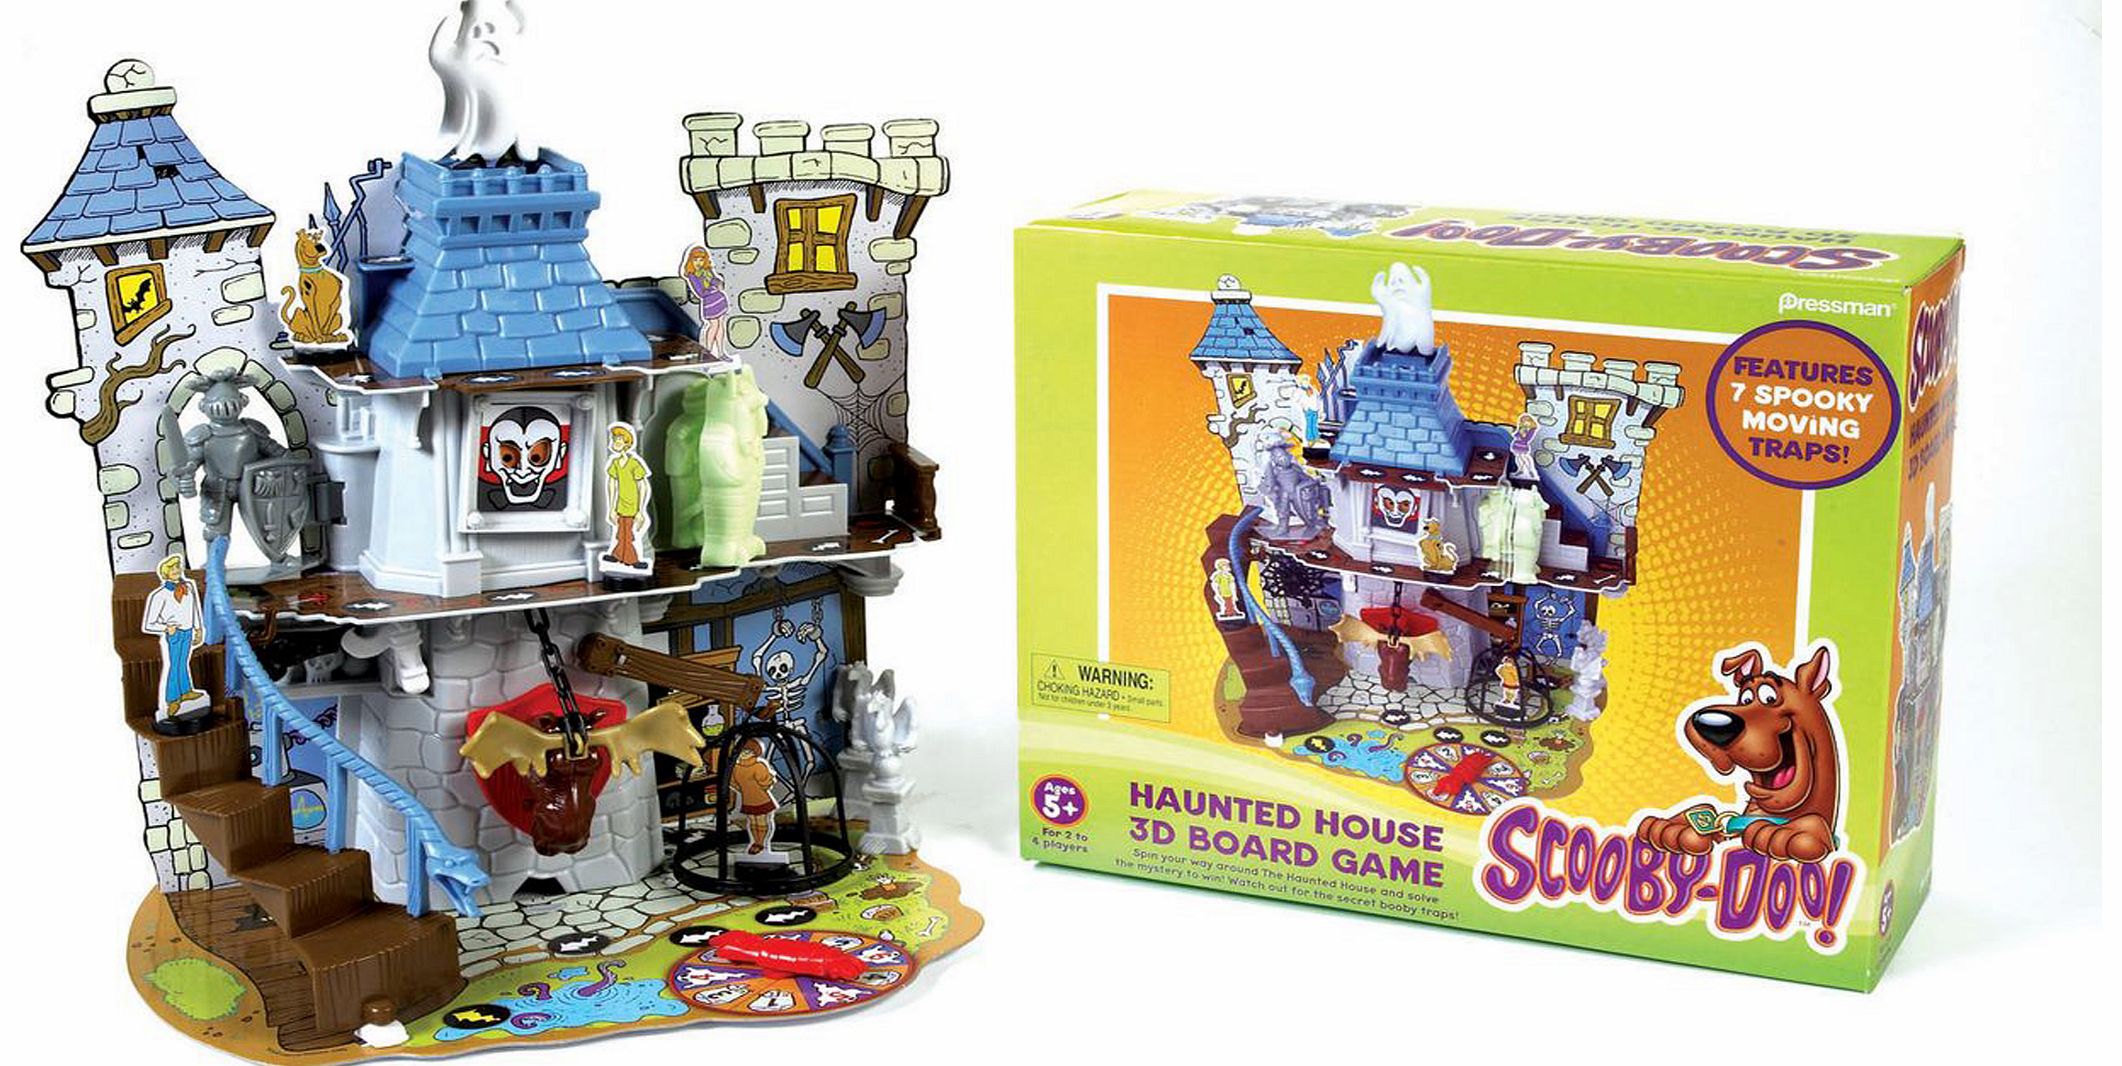 Pressman Toy Int Scooby Doo Haunted House 3D Game